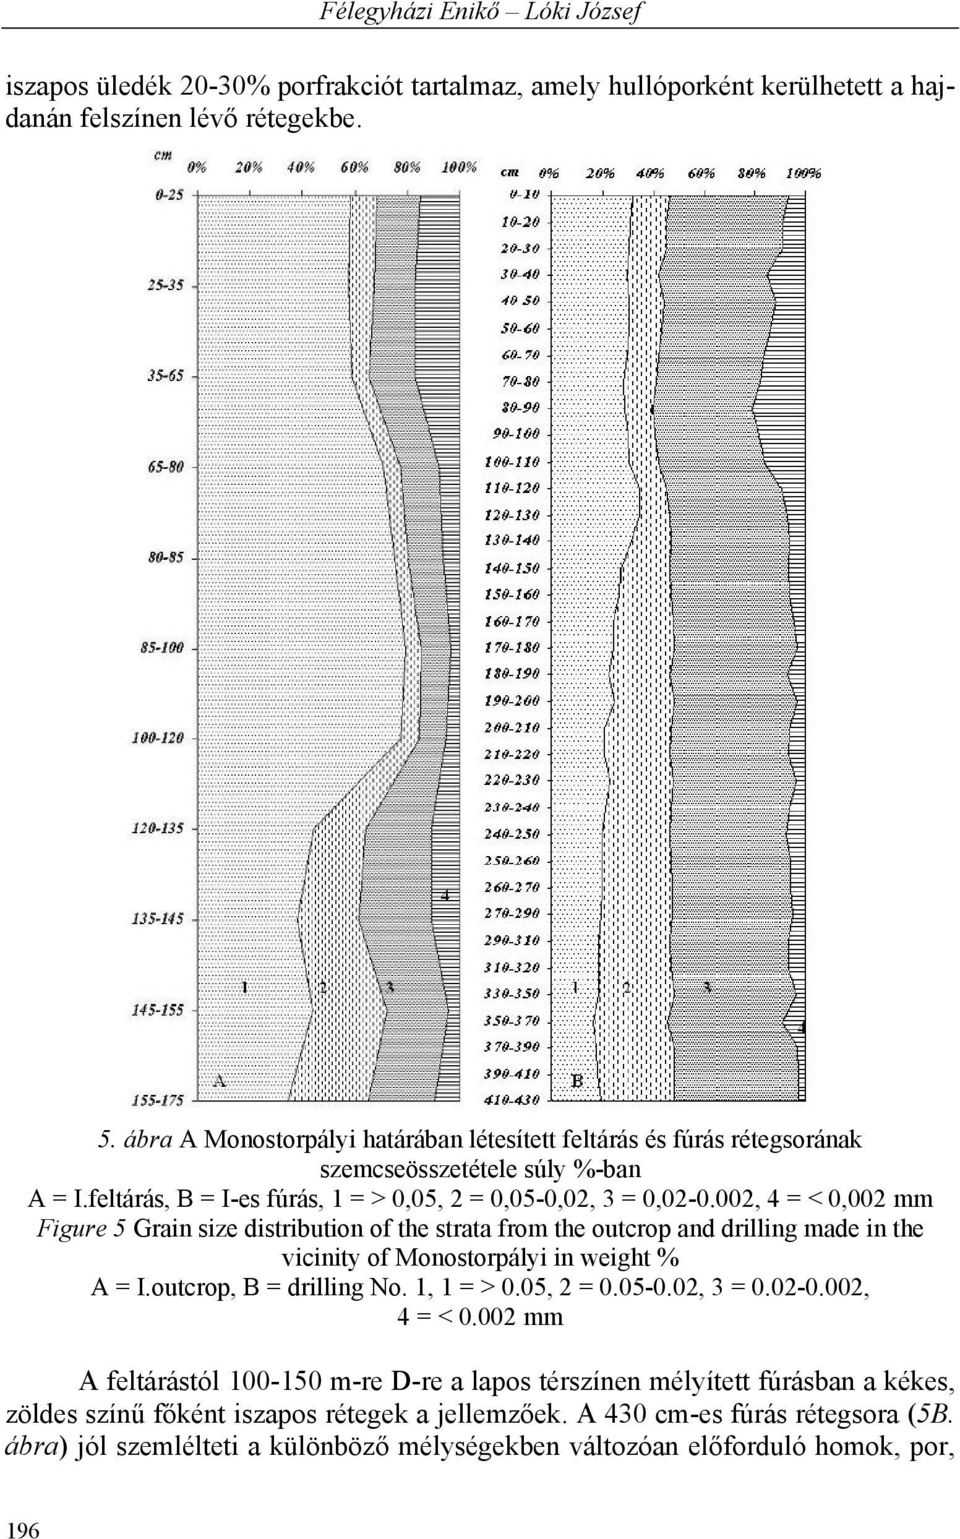 002, 4 = < 0,002 mm Figure 5 Grain size distribution of the strata from the outcrop and drilling made in the vicinity of Monostorpályi in weight % A = I.outcrop, B = drilling No. 1, 1 = > 0.05, 2 = 0.